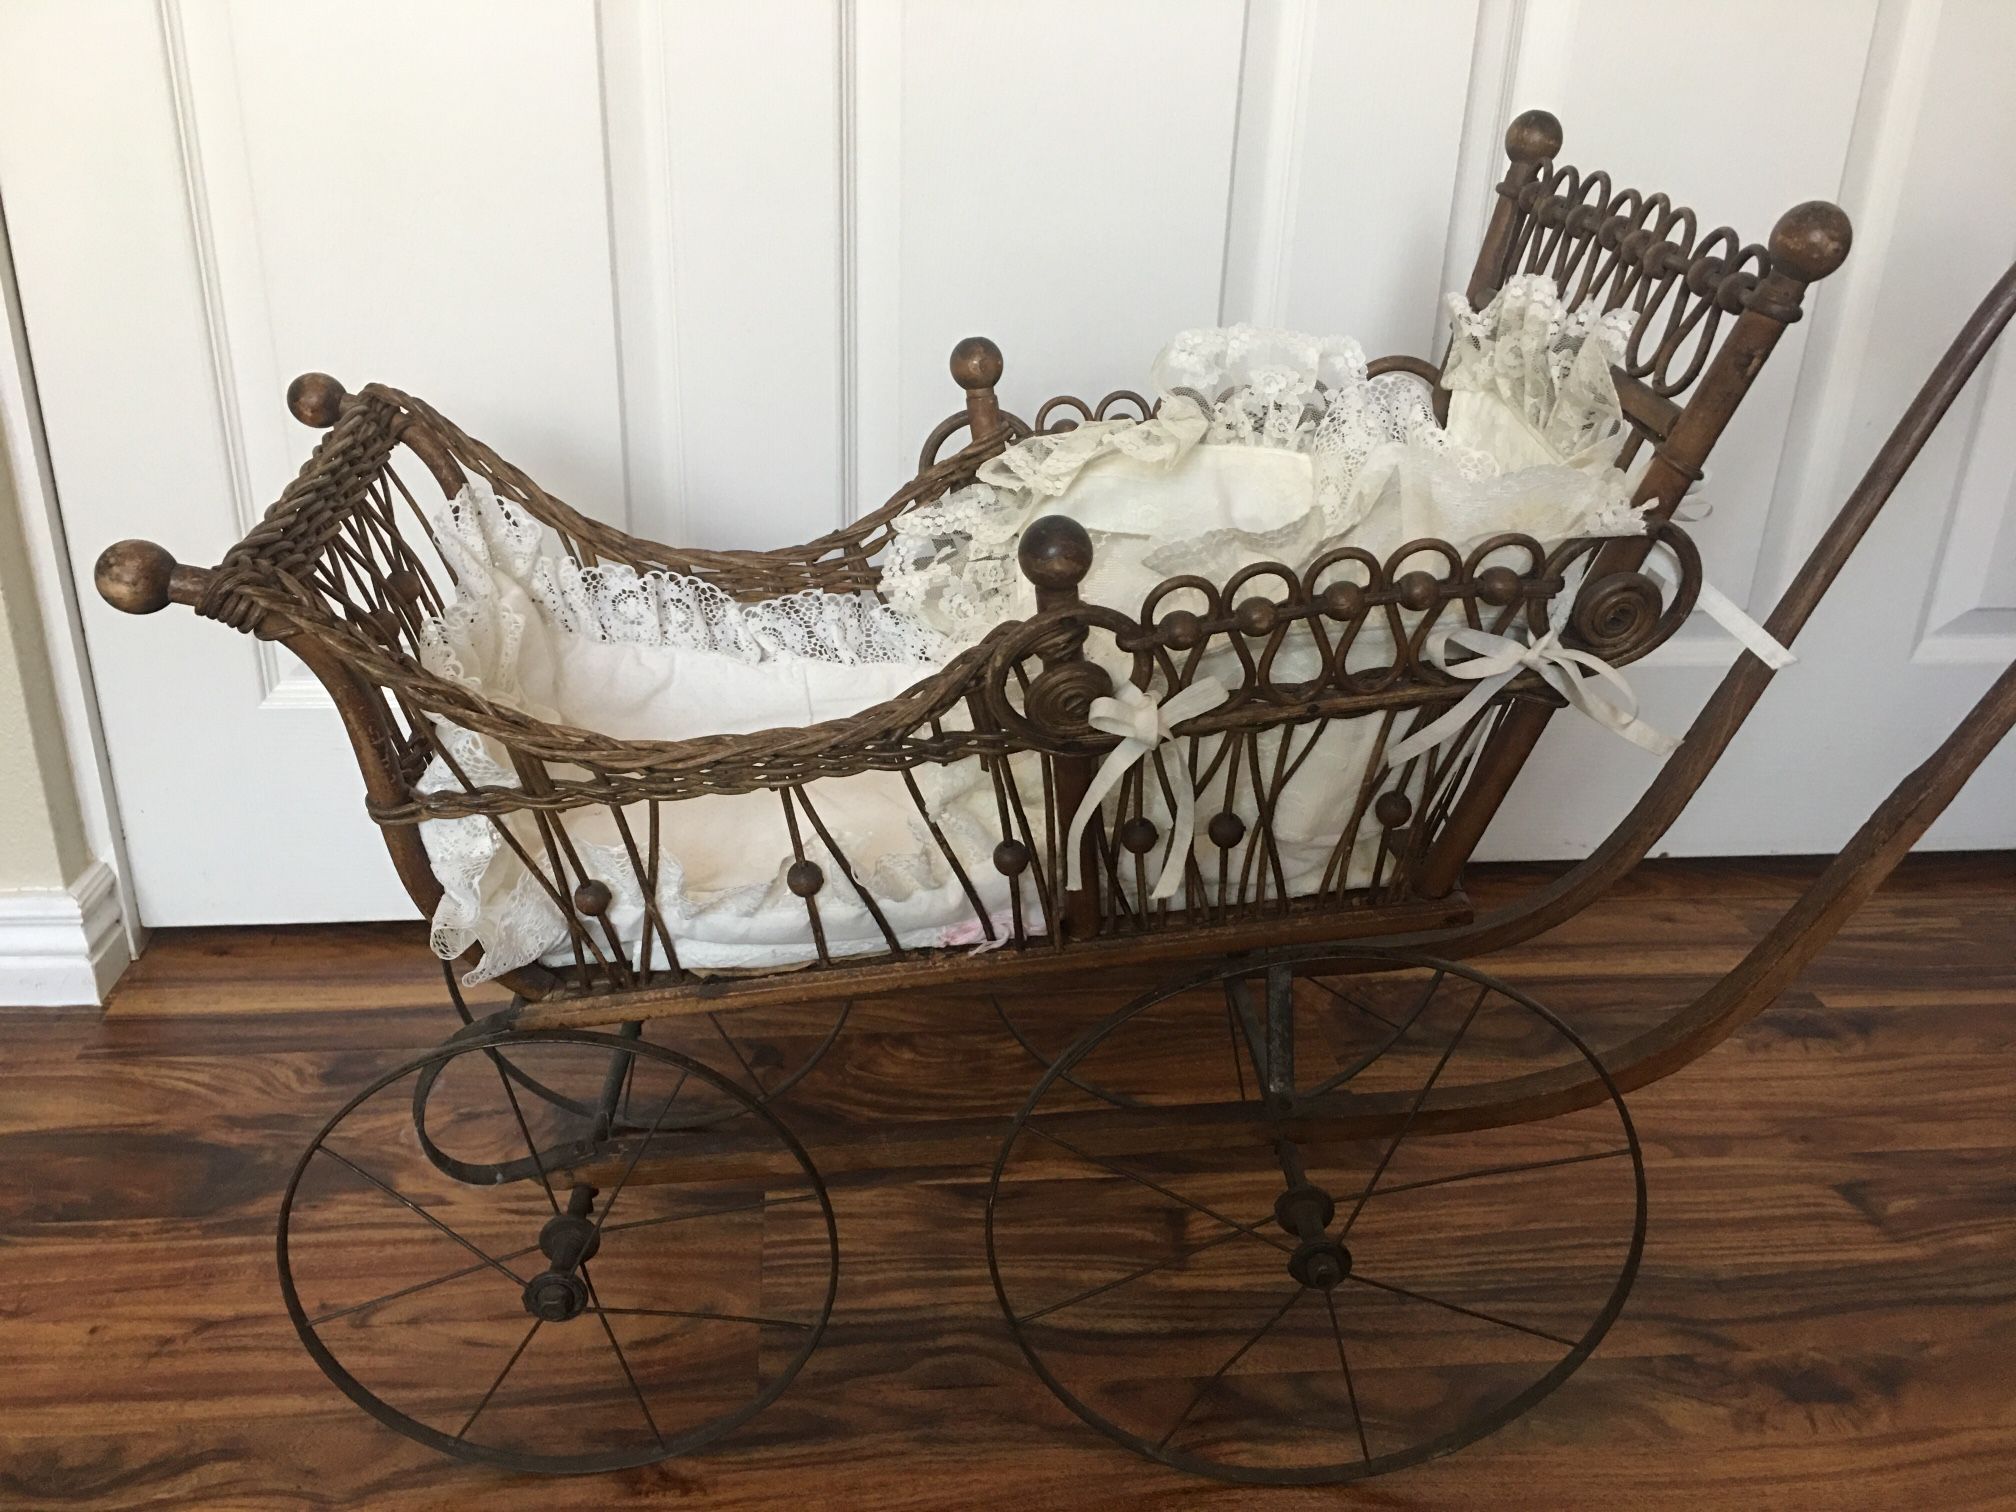 Antique stroller with baby doll